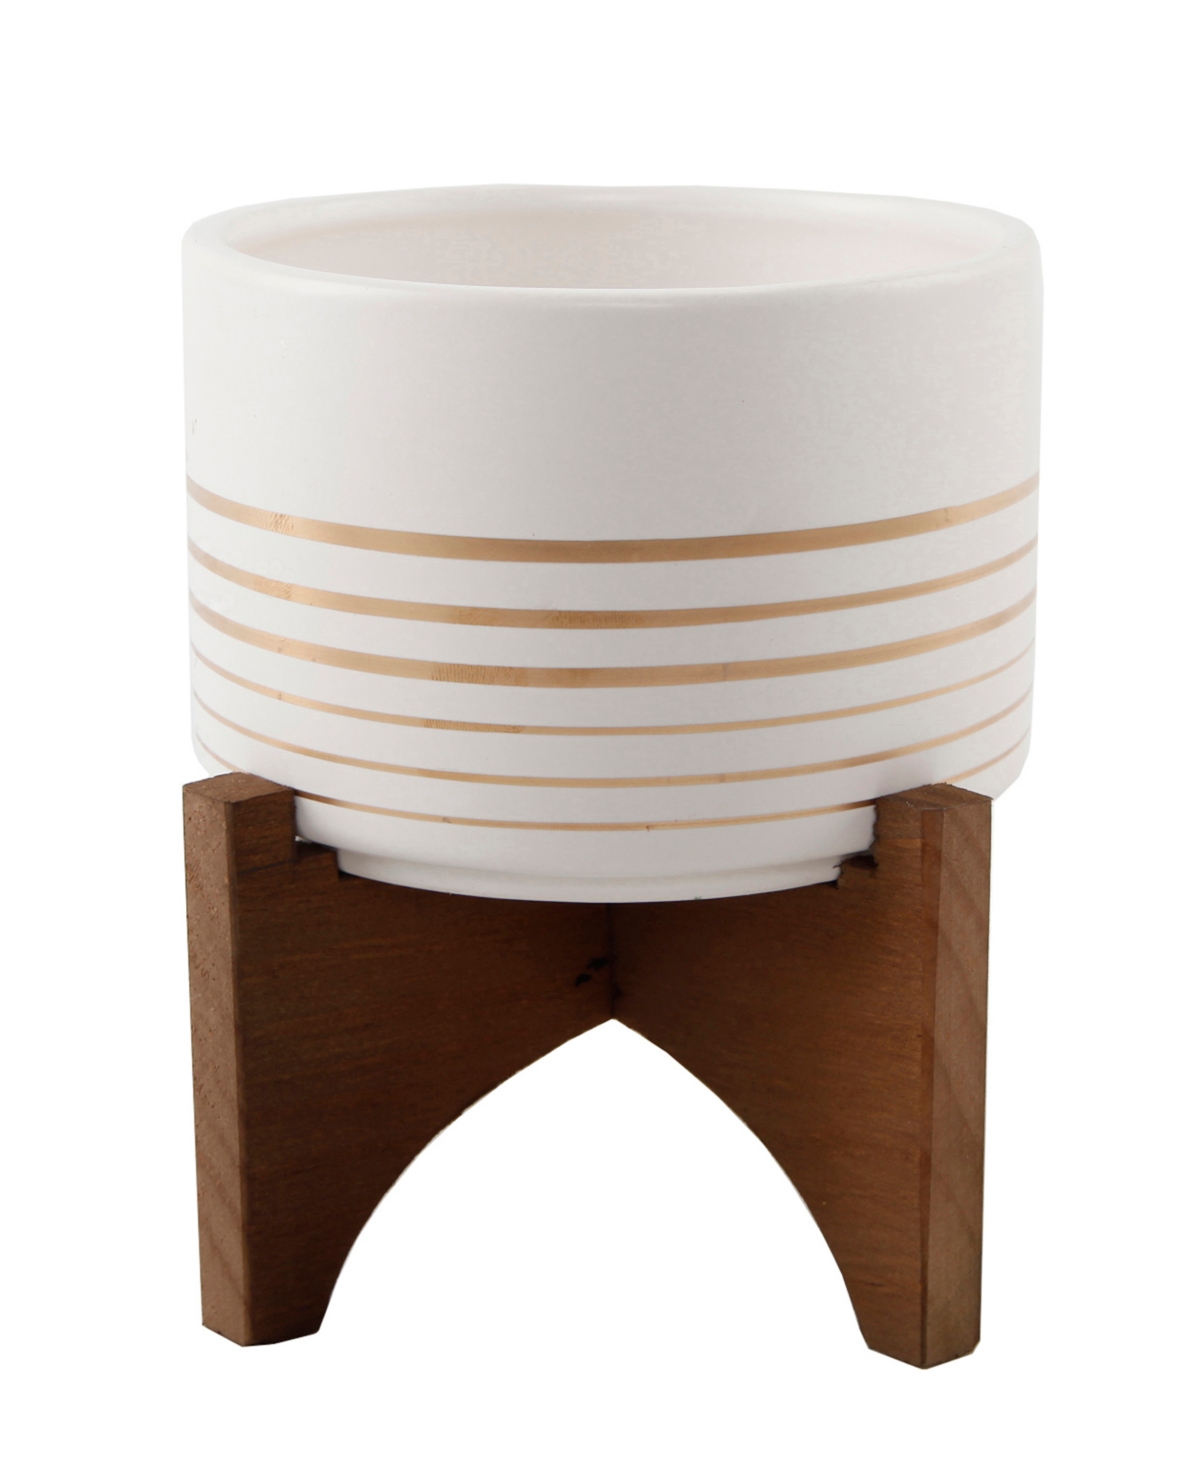 Ceramic Planter on Wood Stand, 5.5" - White and Gold-Tone